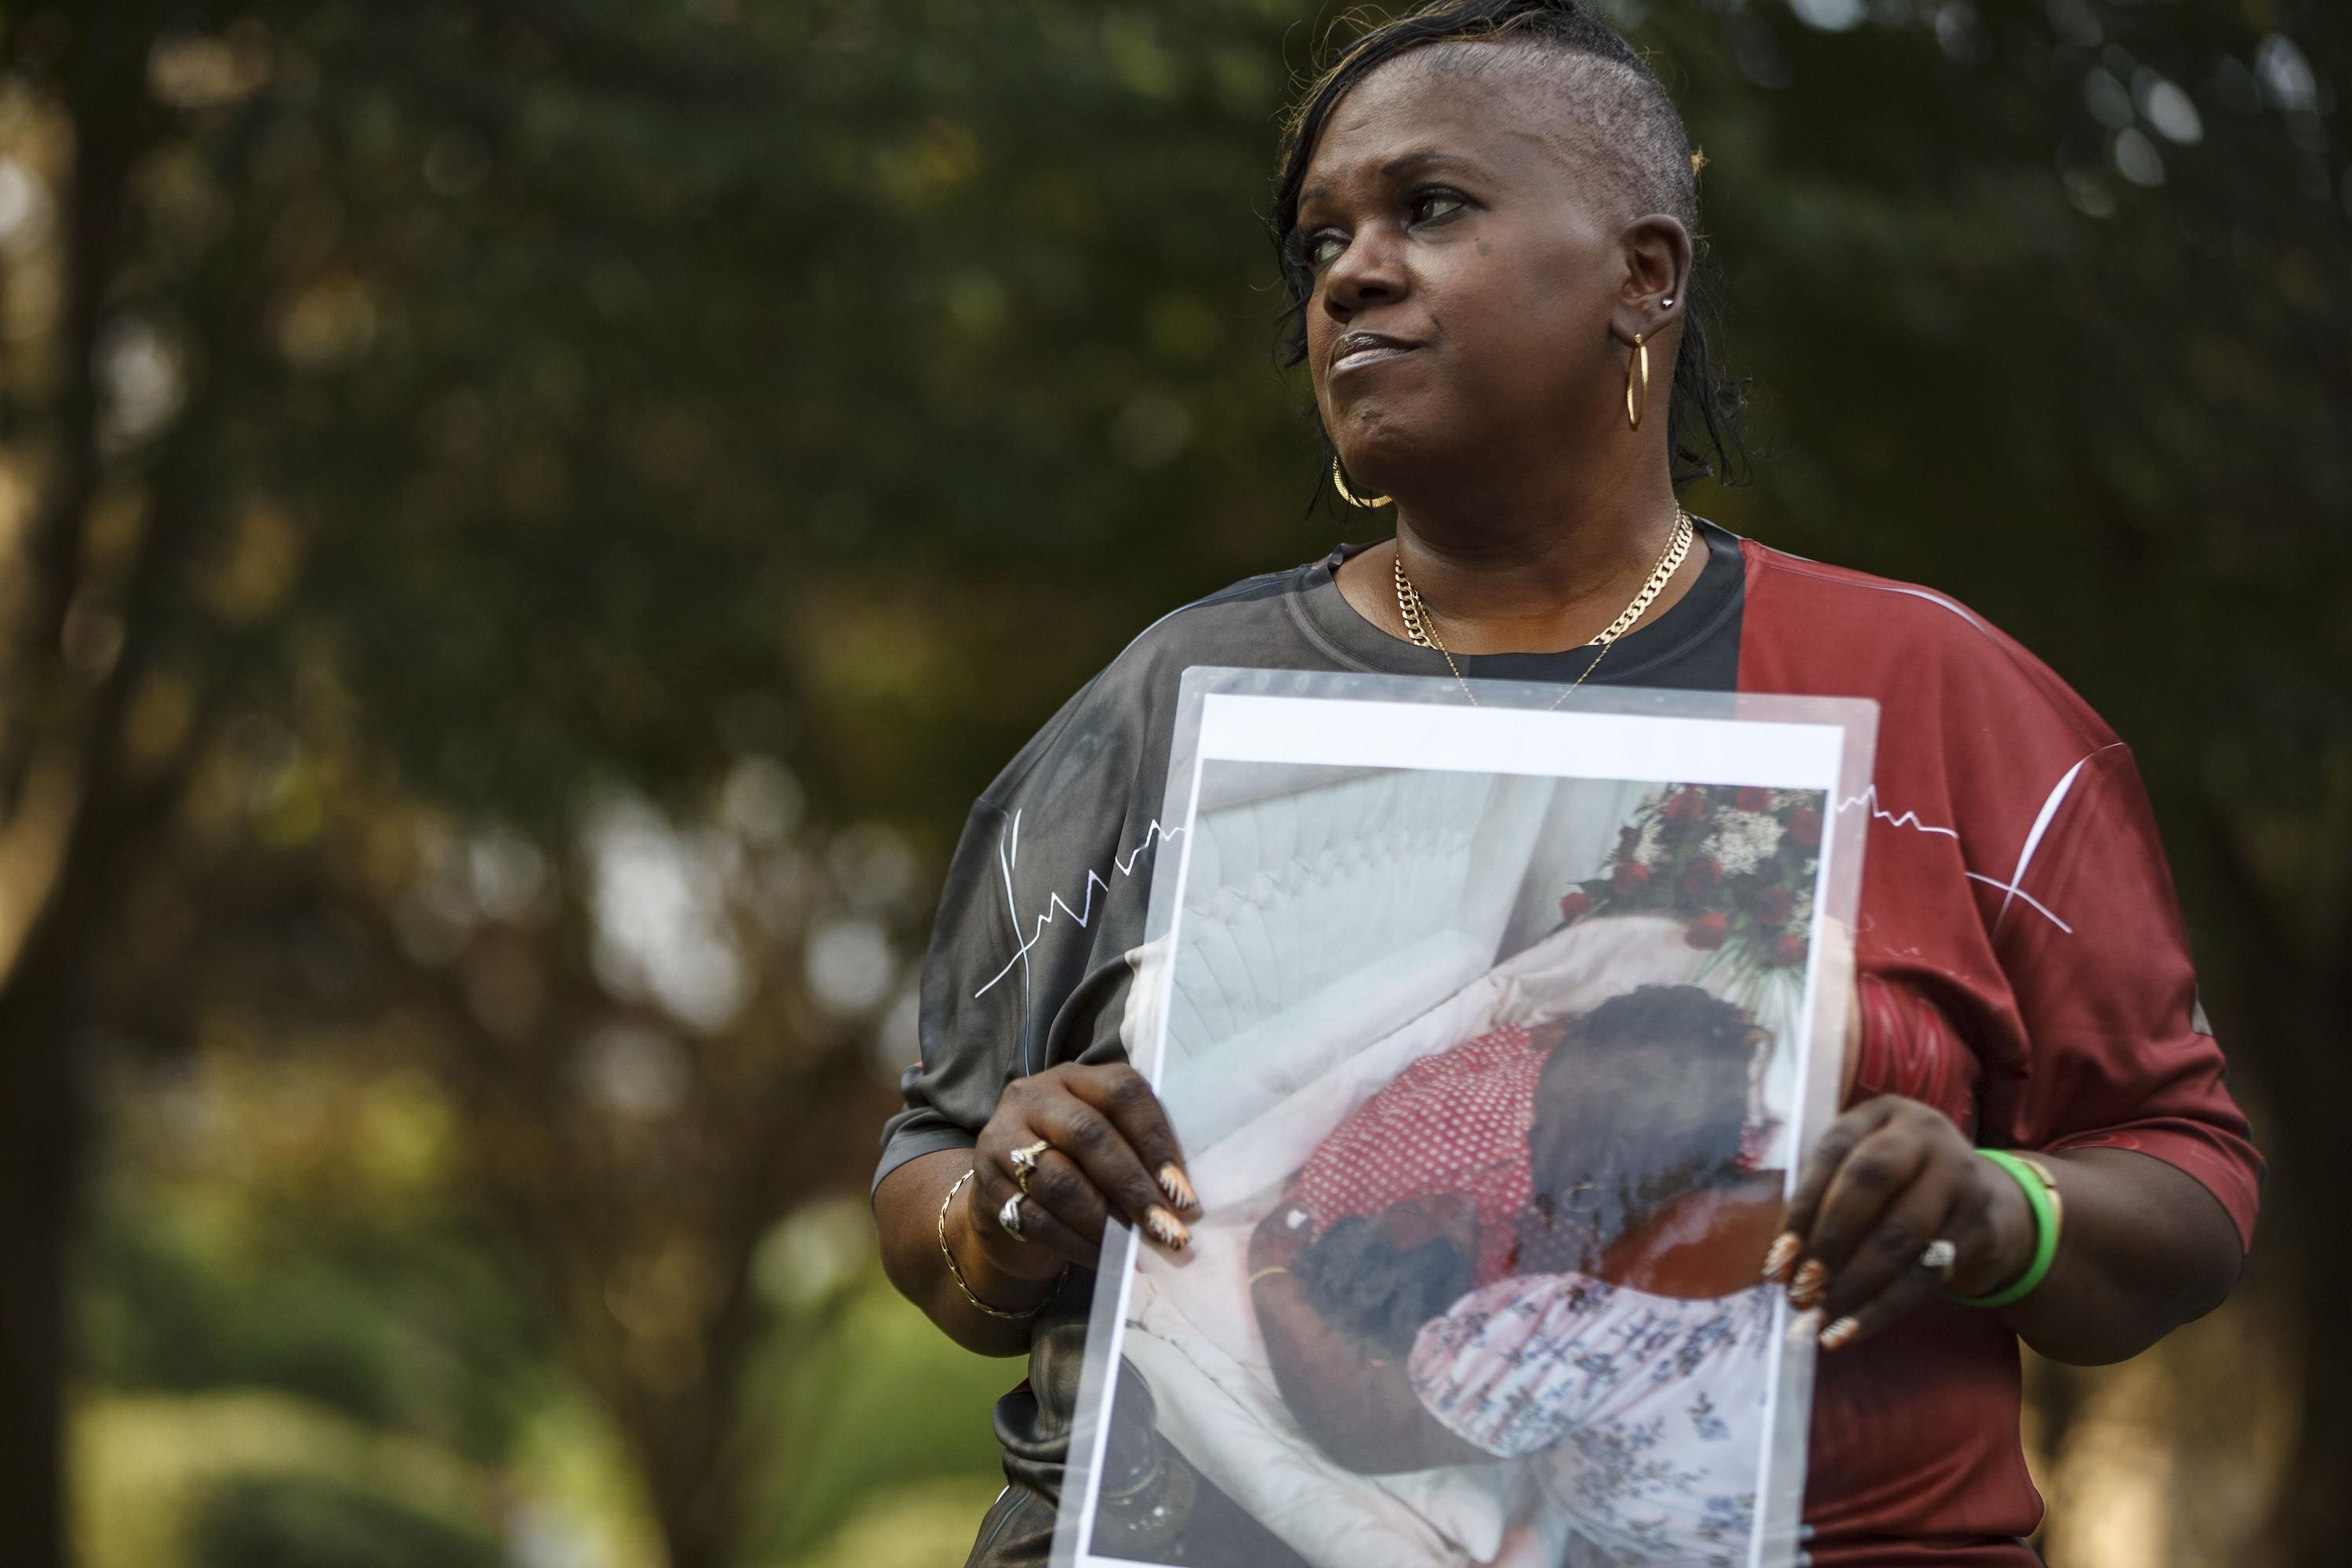 Family hold a rally to call for justice for Fredreca Ford, 29, an inmate at the Franklin County Correction Center on Jackson Pike in Columbus, Ohio, who was found unconscious in her cell on June 26, 2021, and later died that day. 